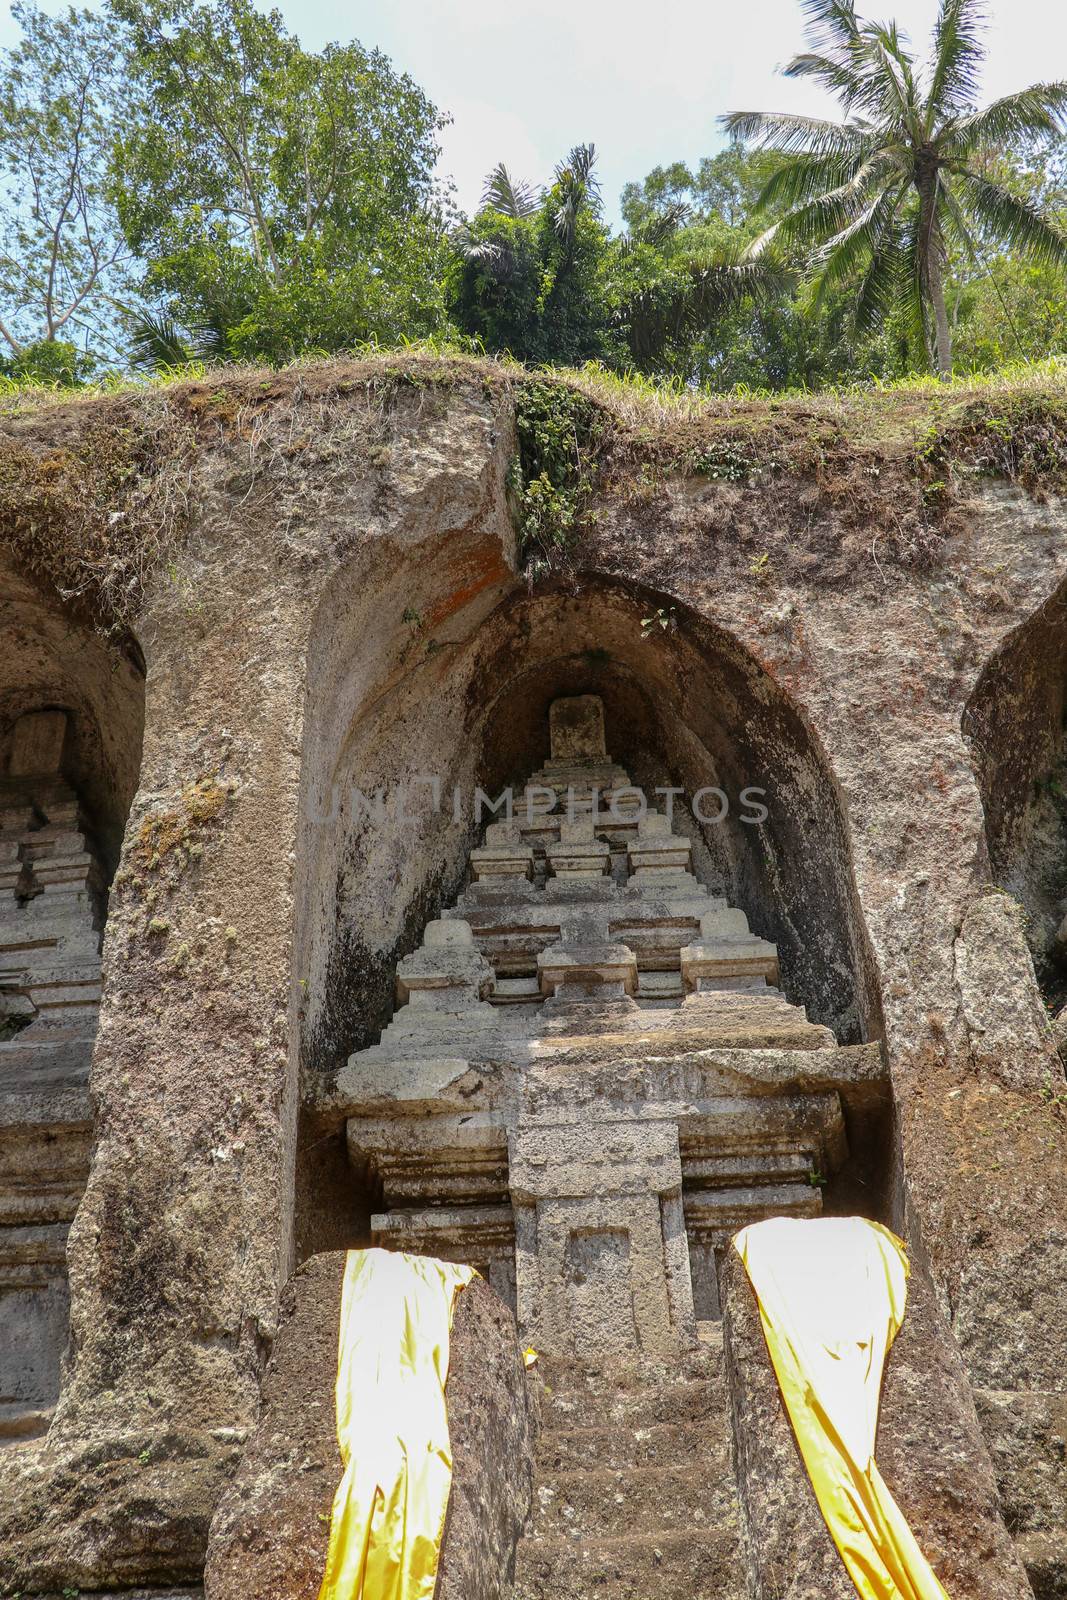 These funeral monuments are thought to be dedicated to King Anak Wungsu of the Udayana dynasty and his favorite queens. Gunung Kawi is an 11th-century temple and funerary complex in Tampaksiring.